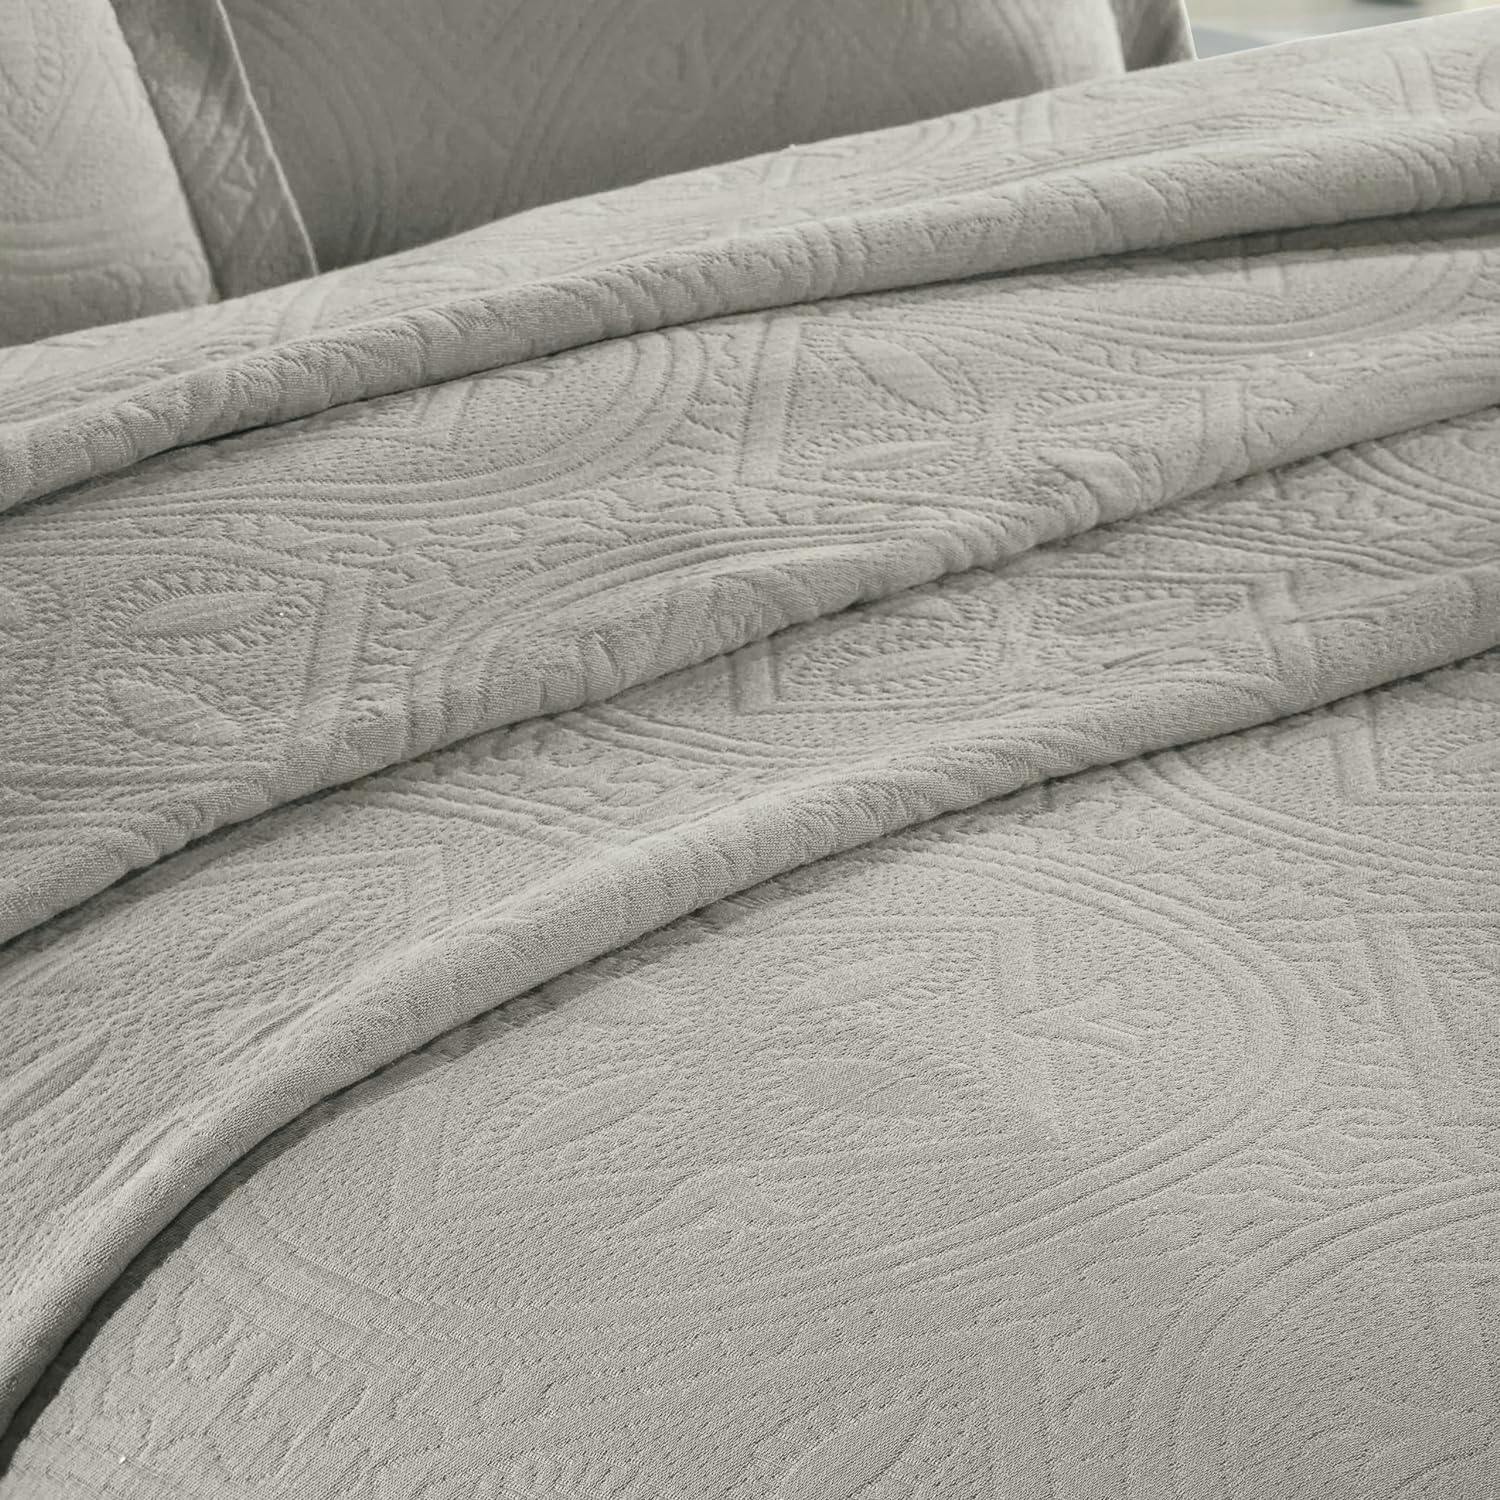 Celtic Circles King White Cotton Bedspread and Pillow Shams Set